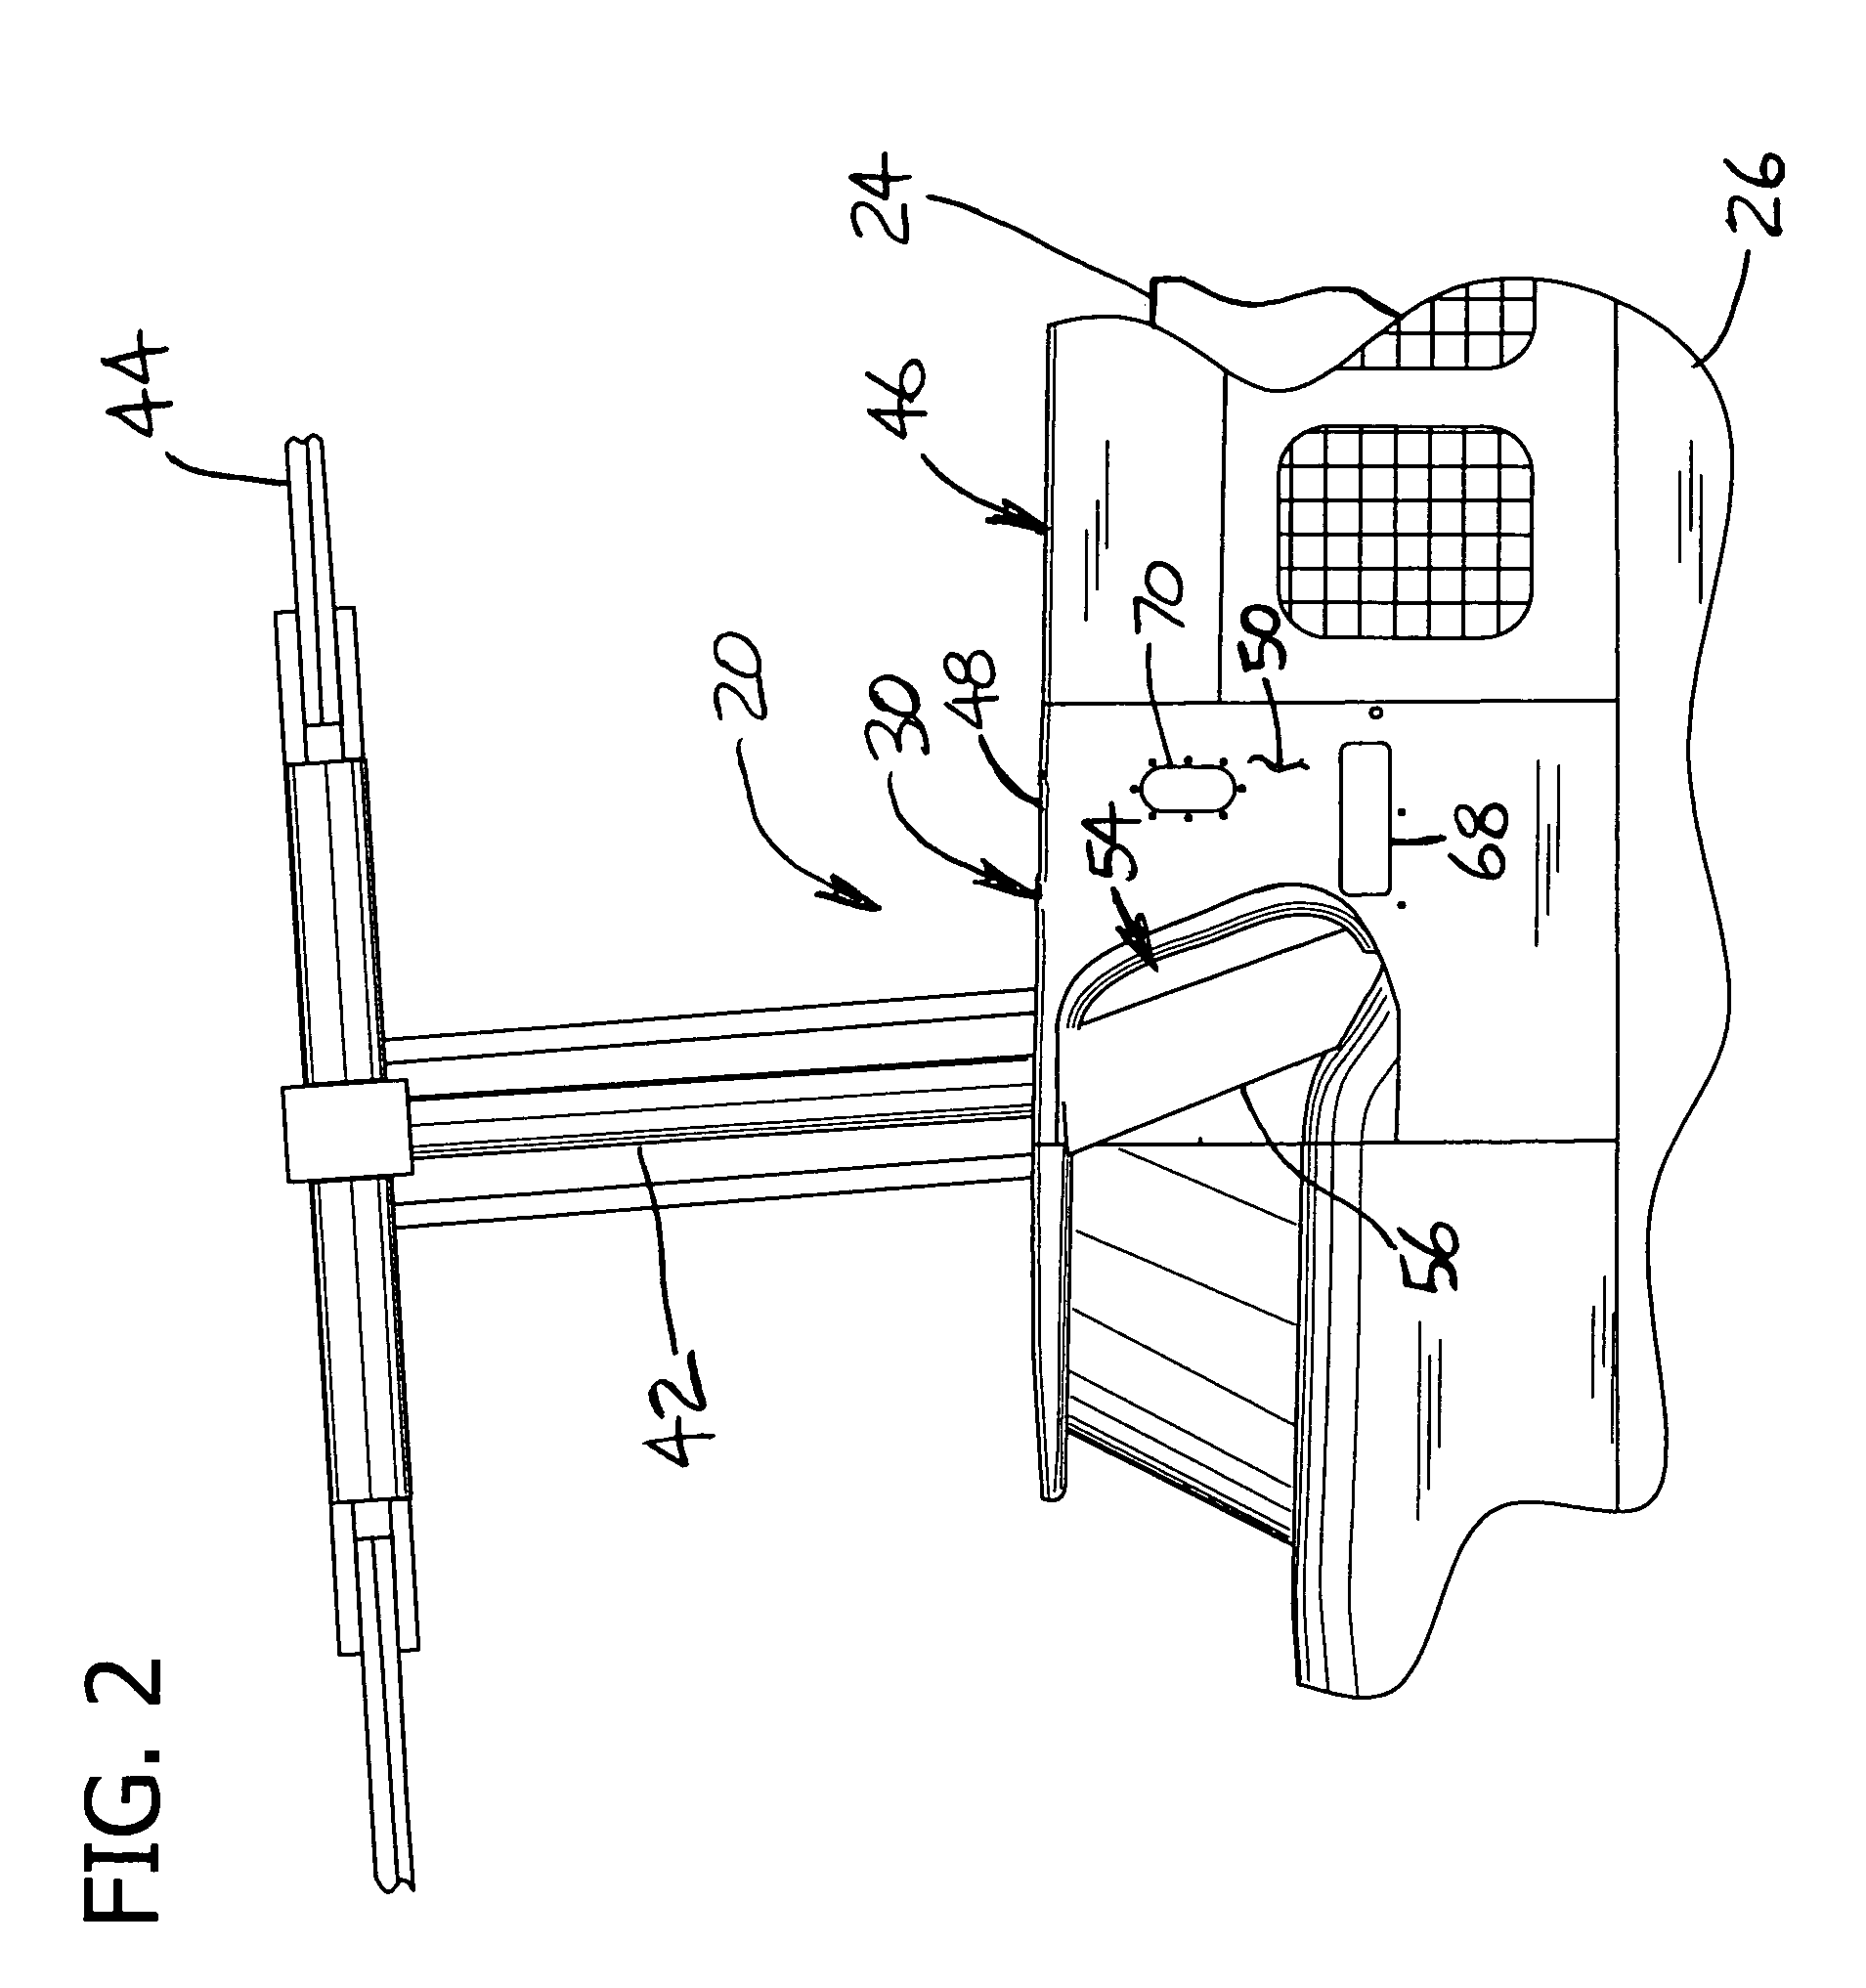 Engine intake system with accessible, interchangeable air filters